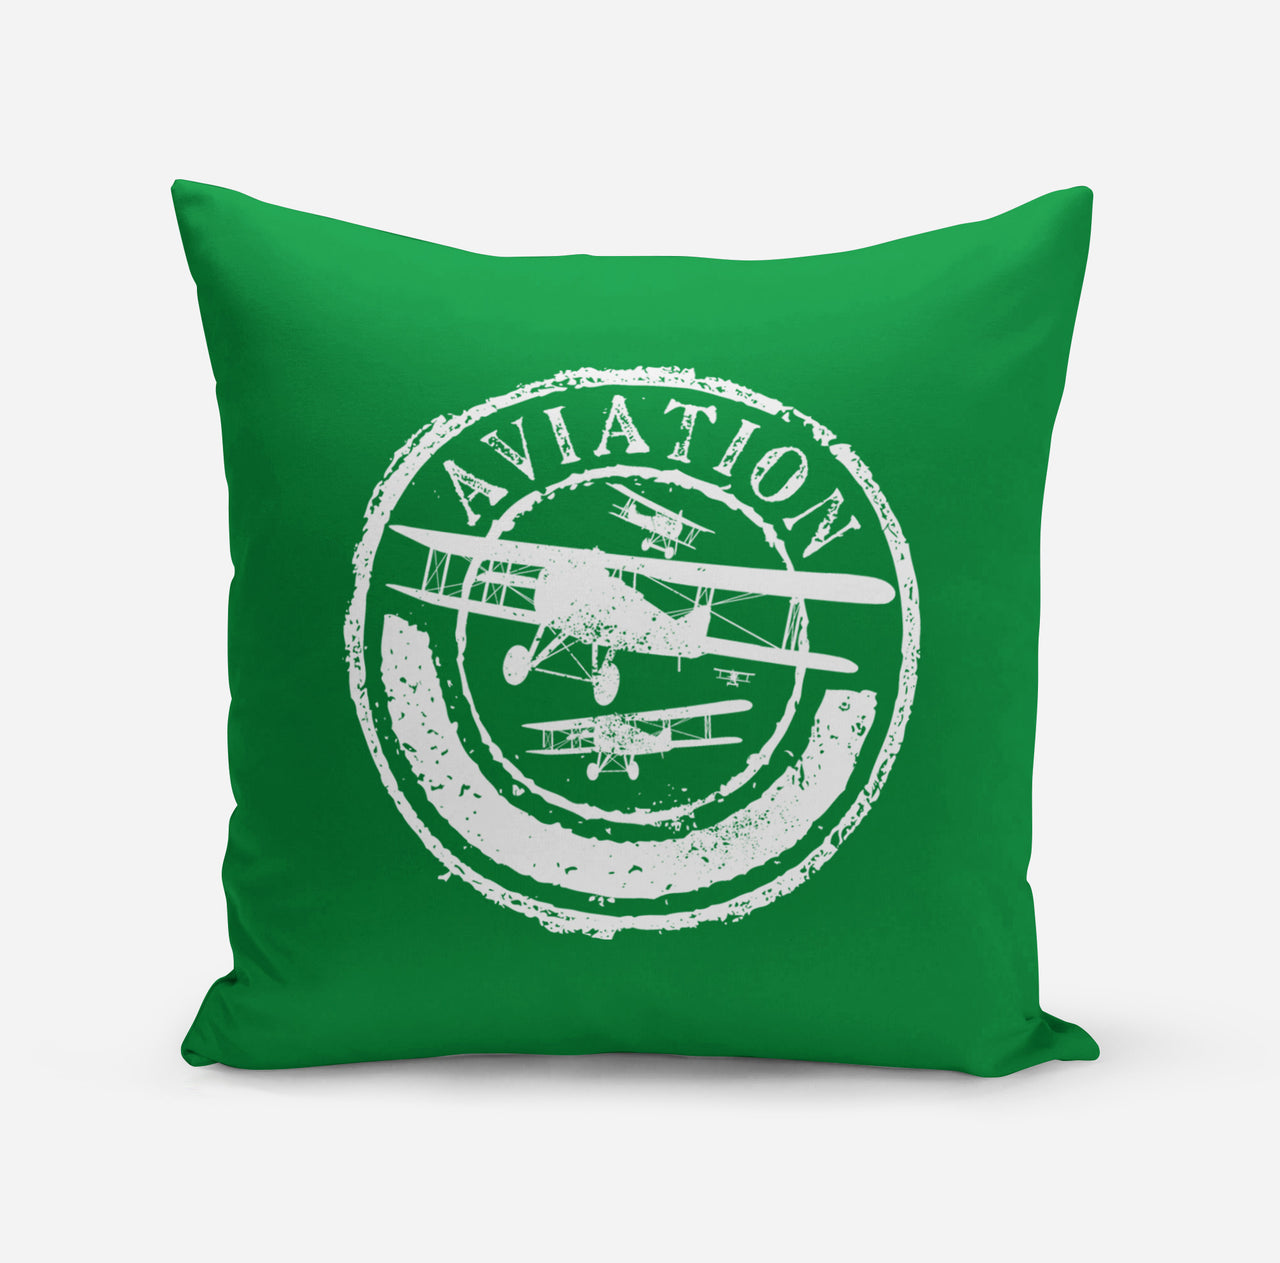 Aviation Lovers Designed Pillows